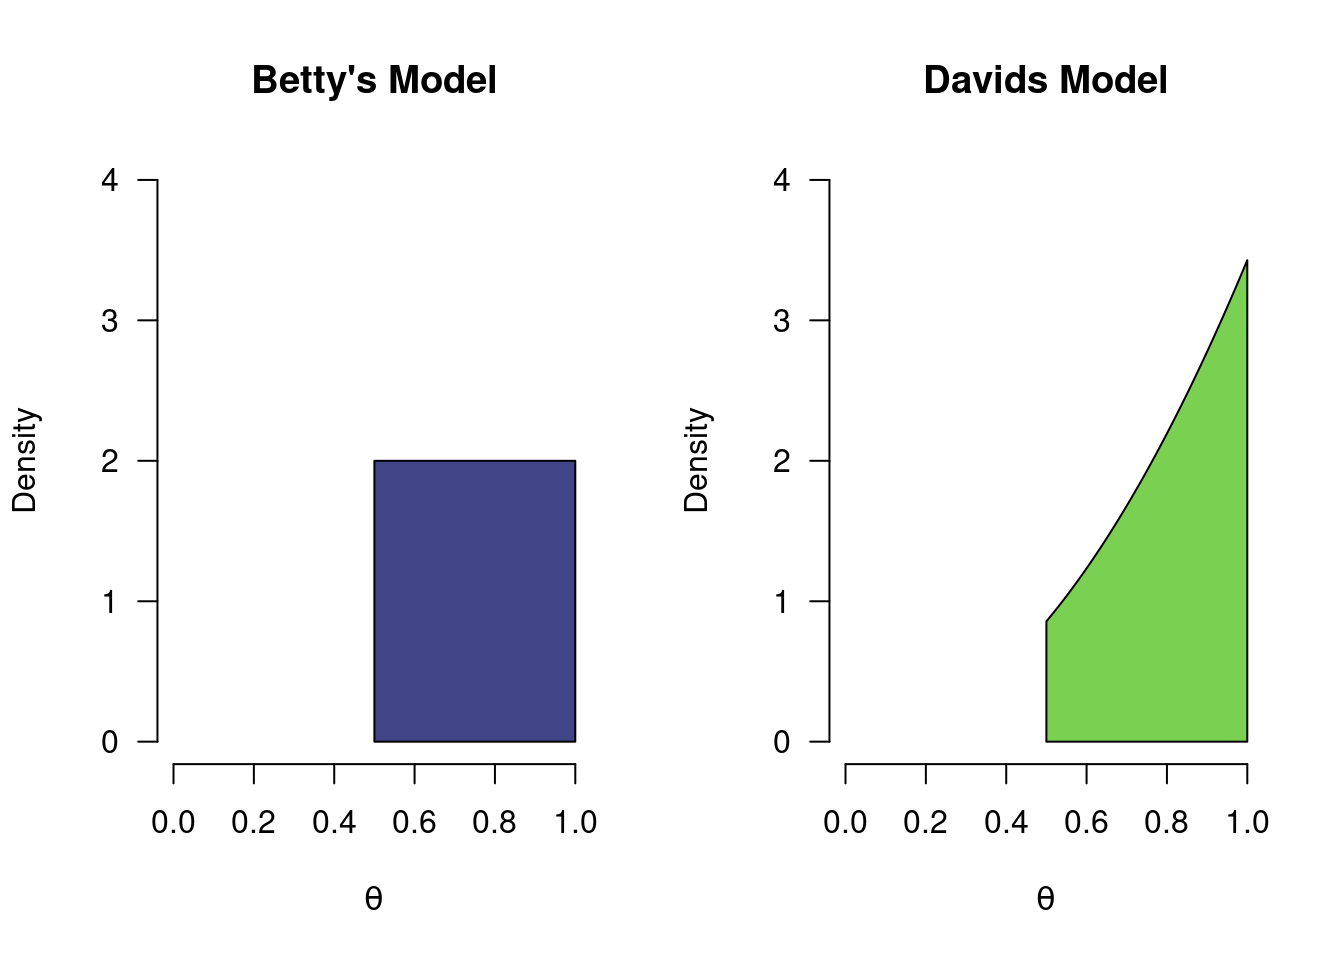 Two more models for a coin toss. The colored regions indicate what each model believes. Even though both Betty and David belive the probabilty of heads to be greater than 0.5, they differ in how plausible they deem specific values in that range.